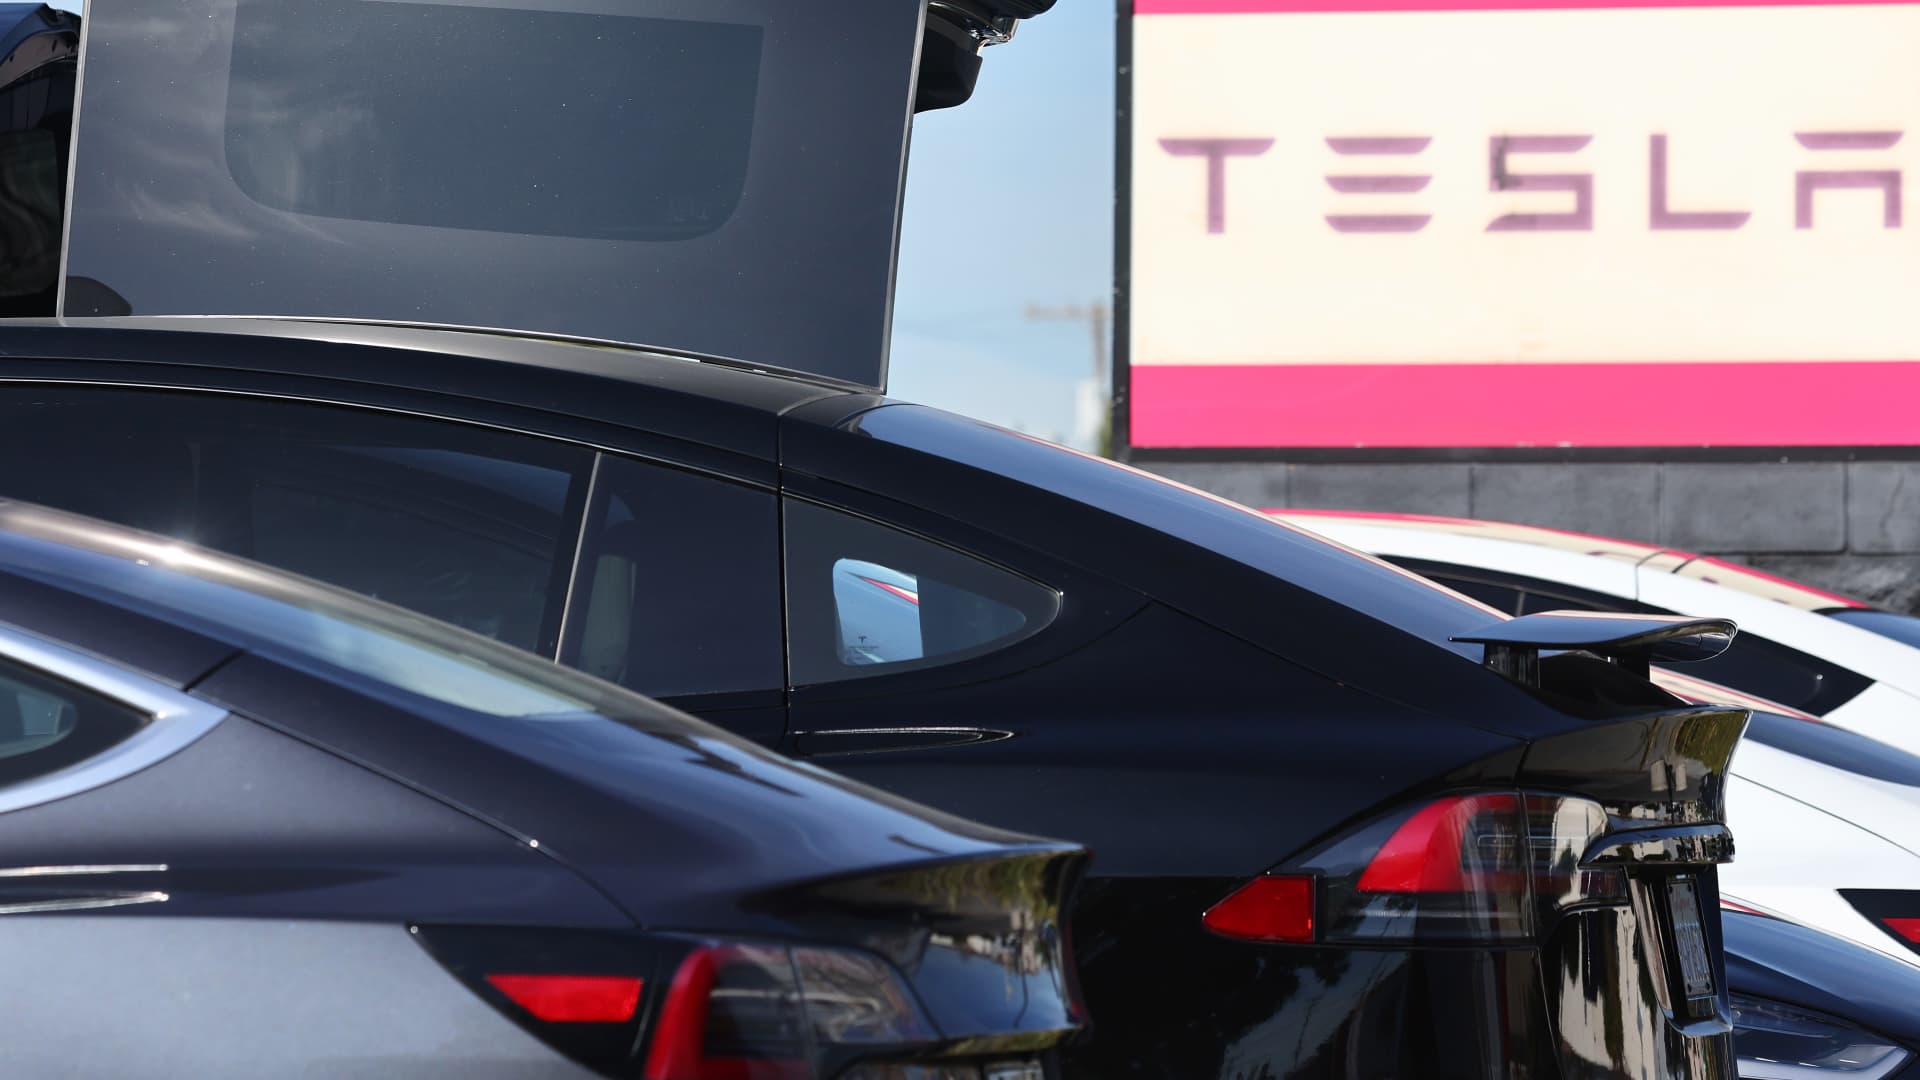 Tesla recalls nearly 200,000 vehicles in US over rearview camera bug